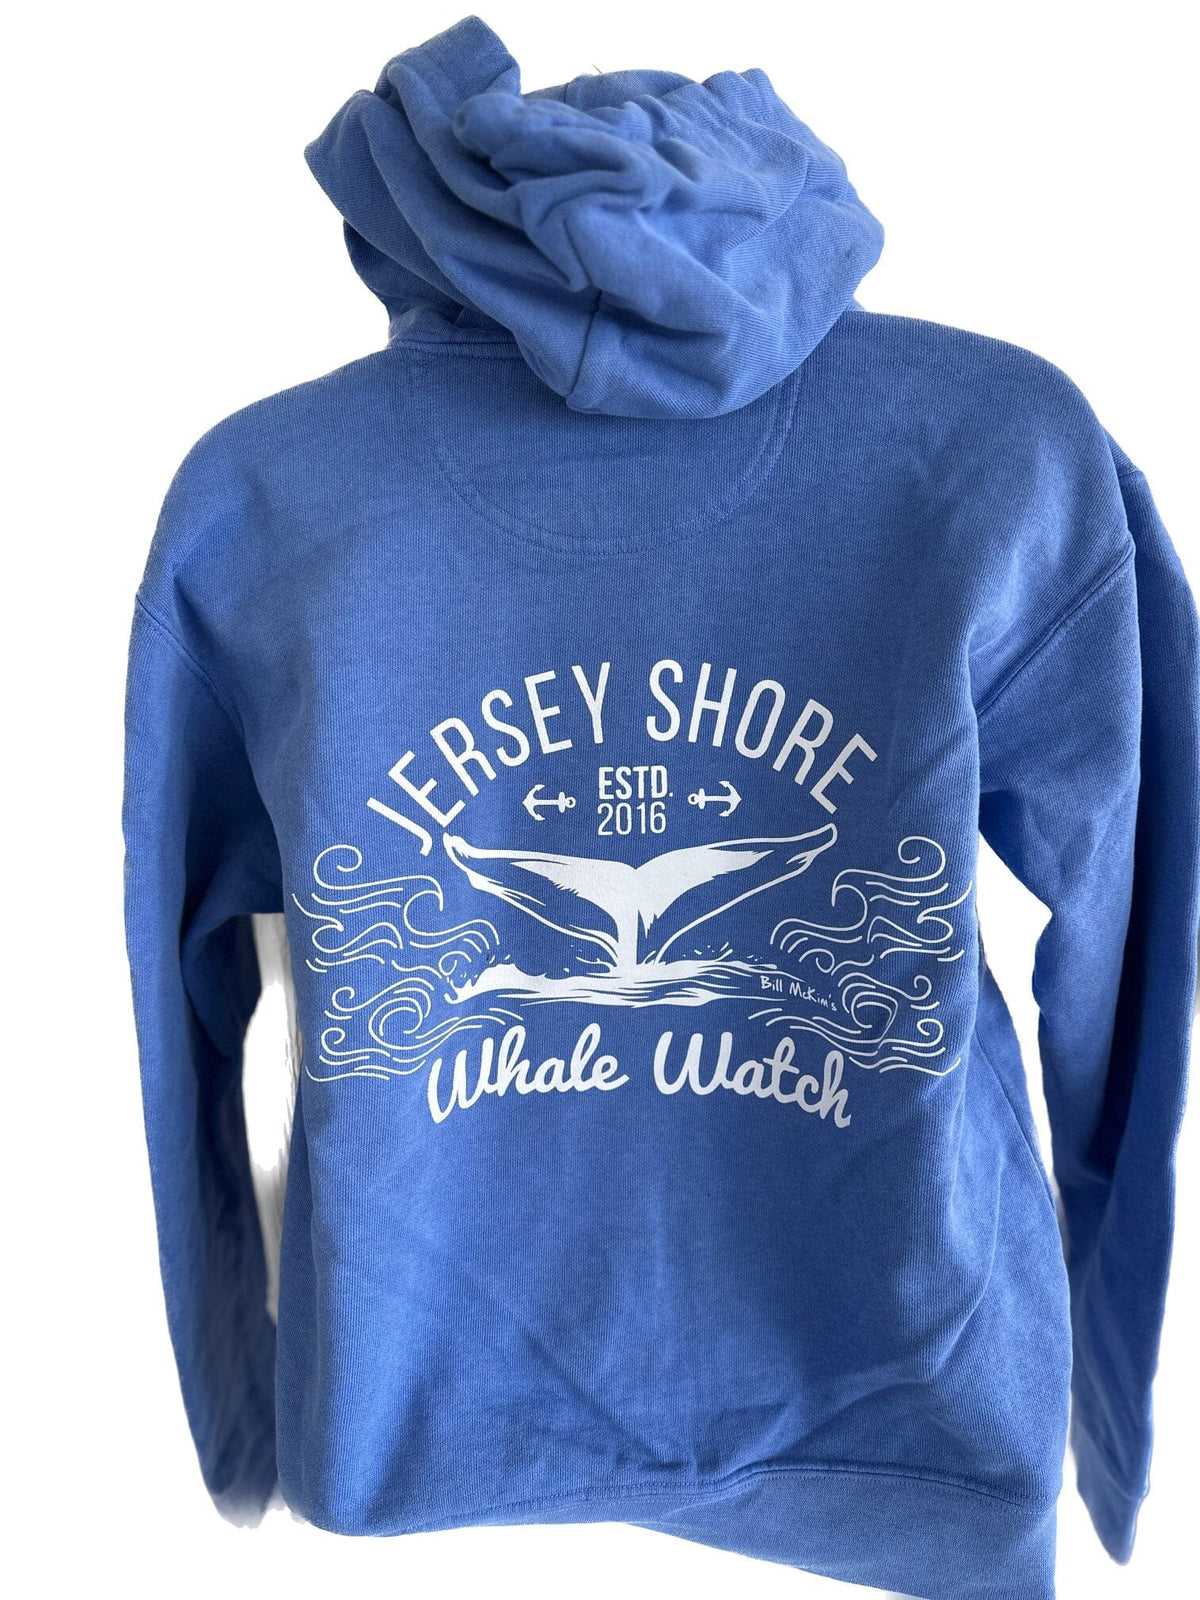 Canyon Run Sweatshirts Jersey Shore Whale Watch Bill McKim Photography -Jersey Shore whale watch tours Small Hooded Crunchberry Blue Ladies 